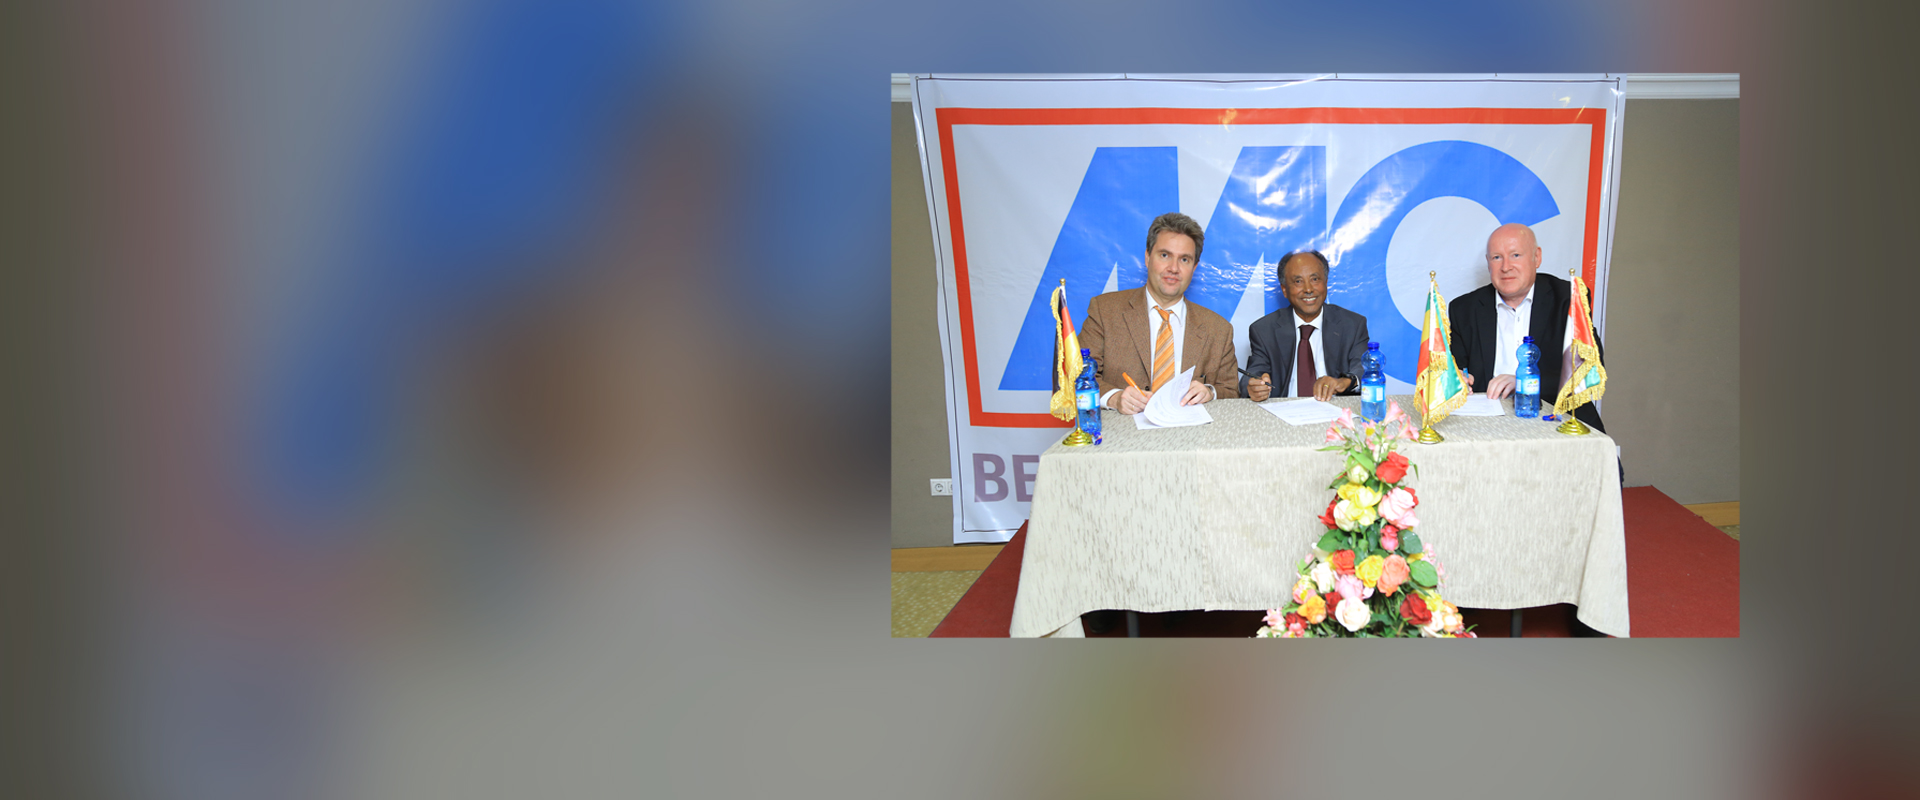 Completion of the transaction: MC acquires majority of a company in Ethiopia